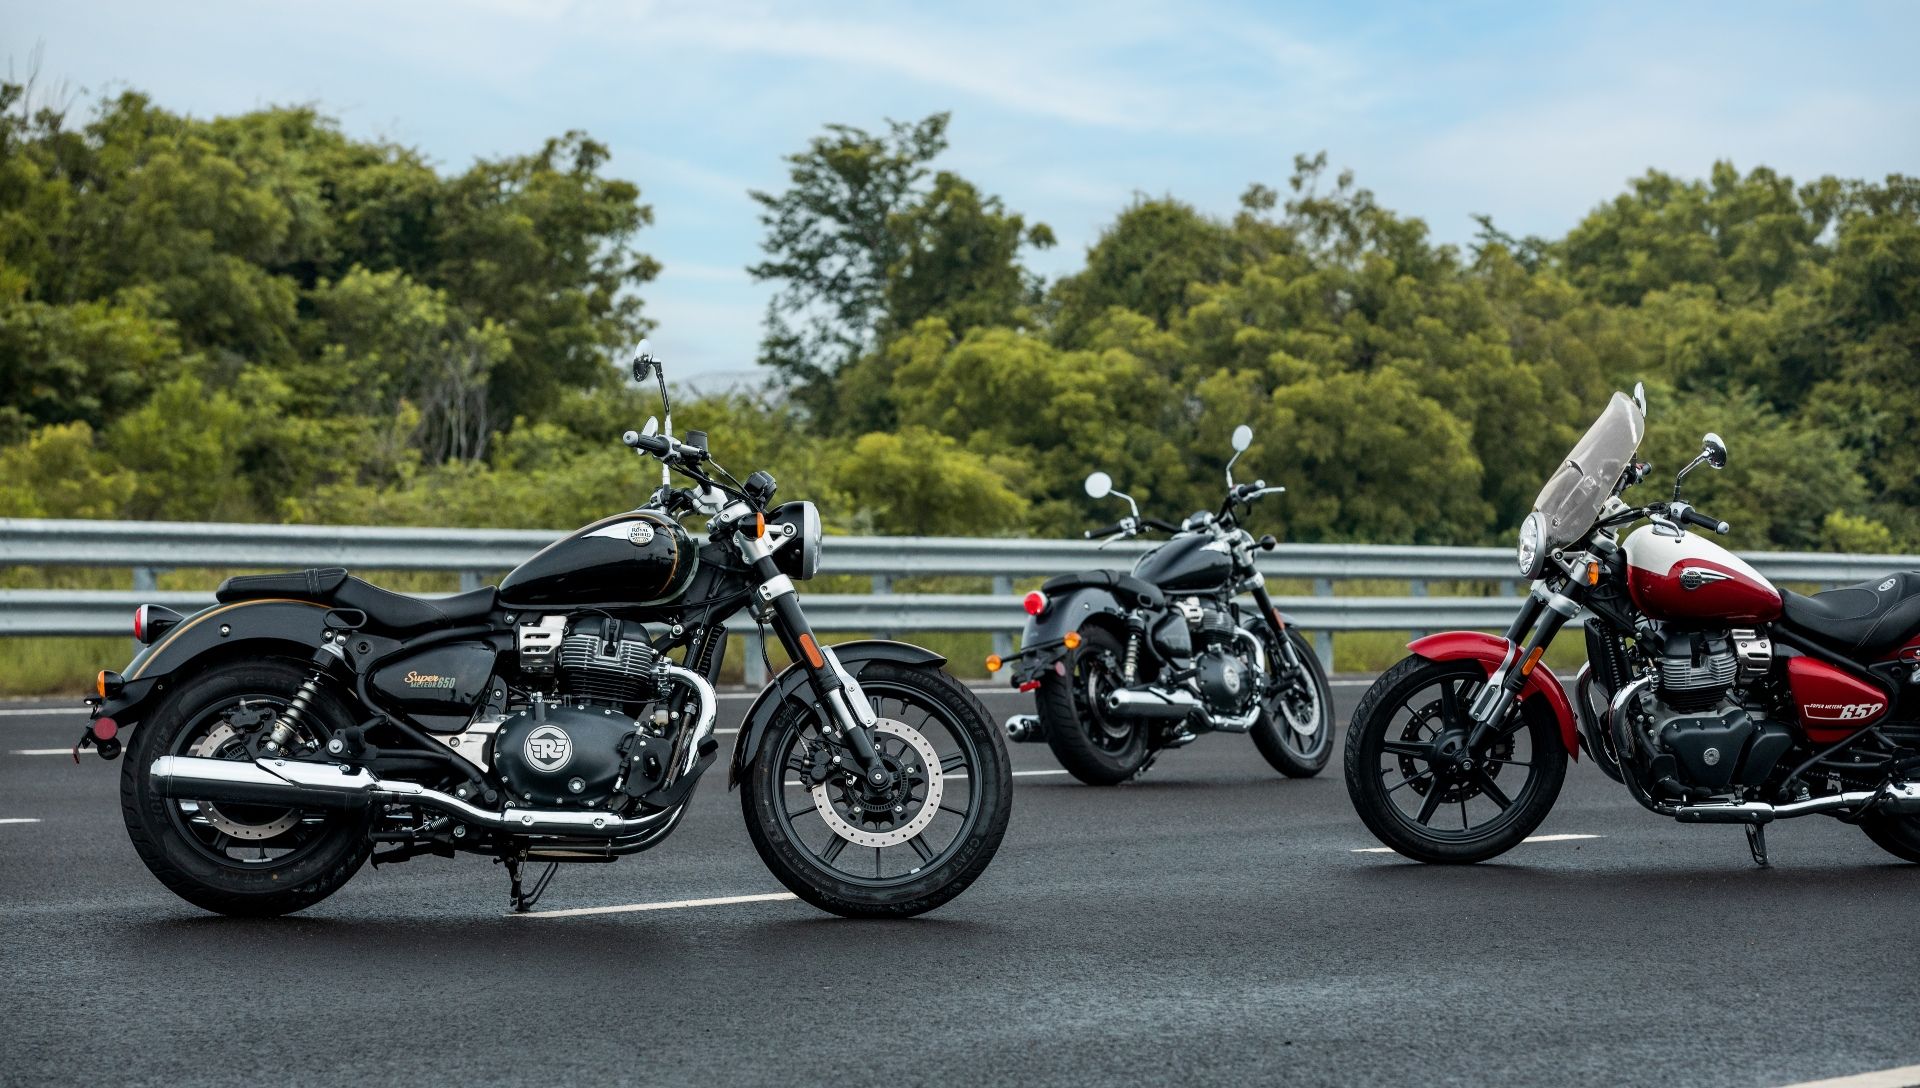 Royal Enfield’s iconic Indian cruiser, the Super Meteor 650, has been released in the US and Canada